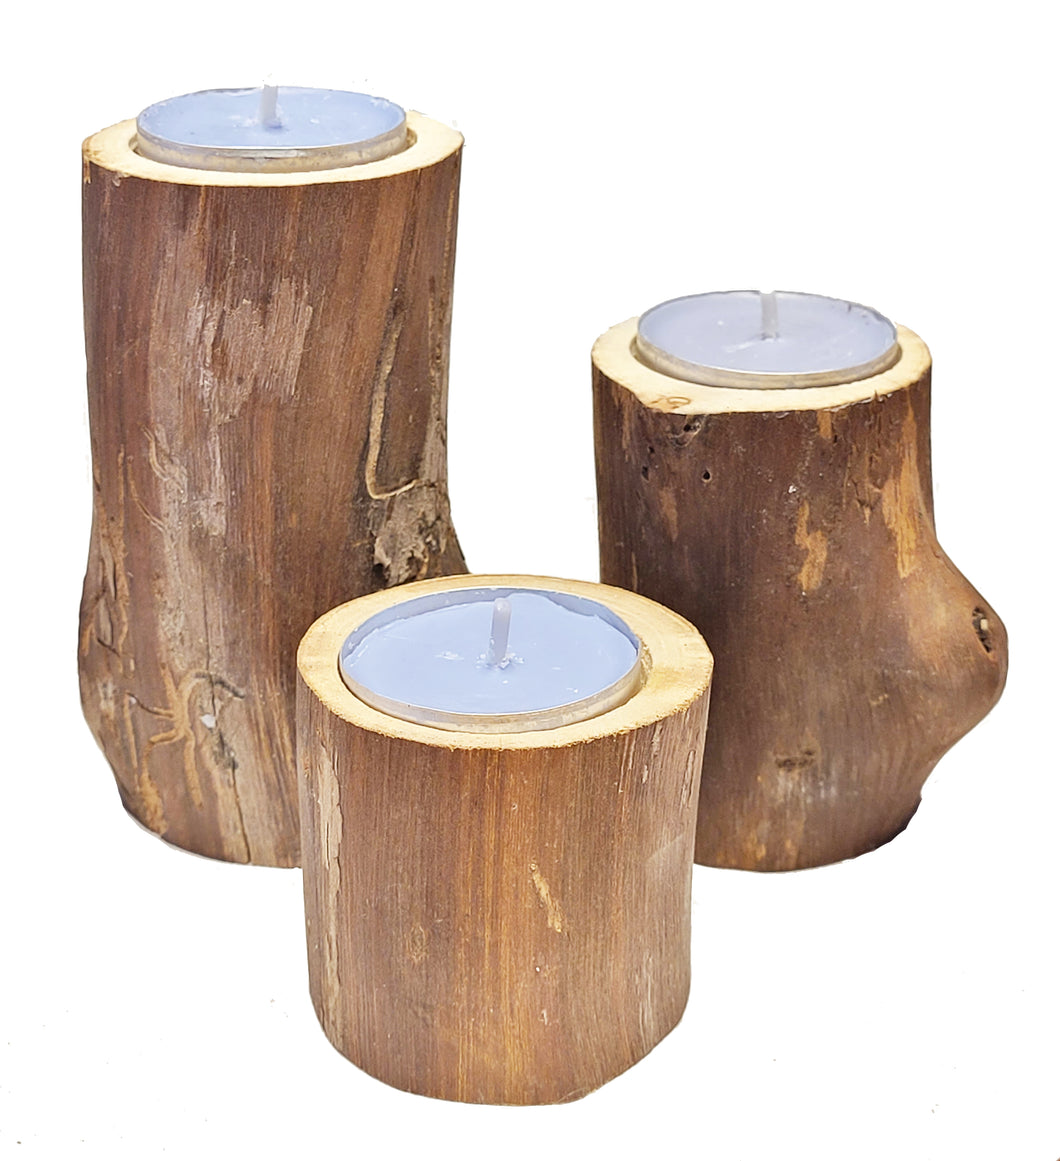 Tealight Candle Holders